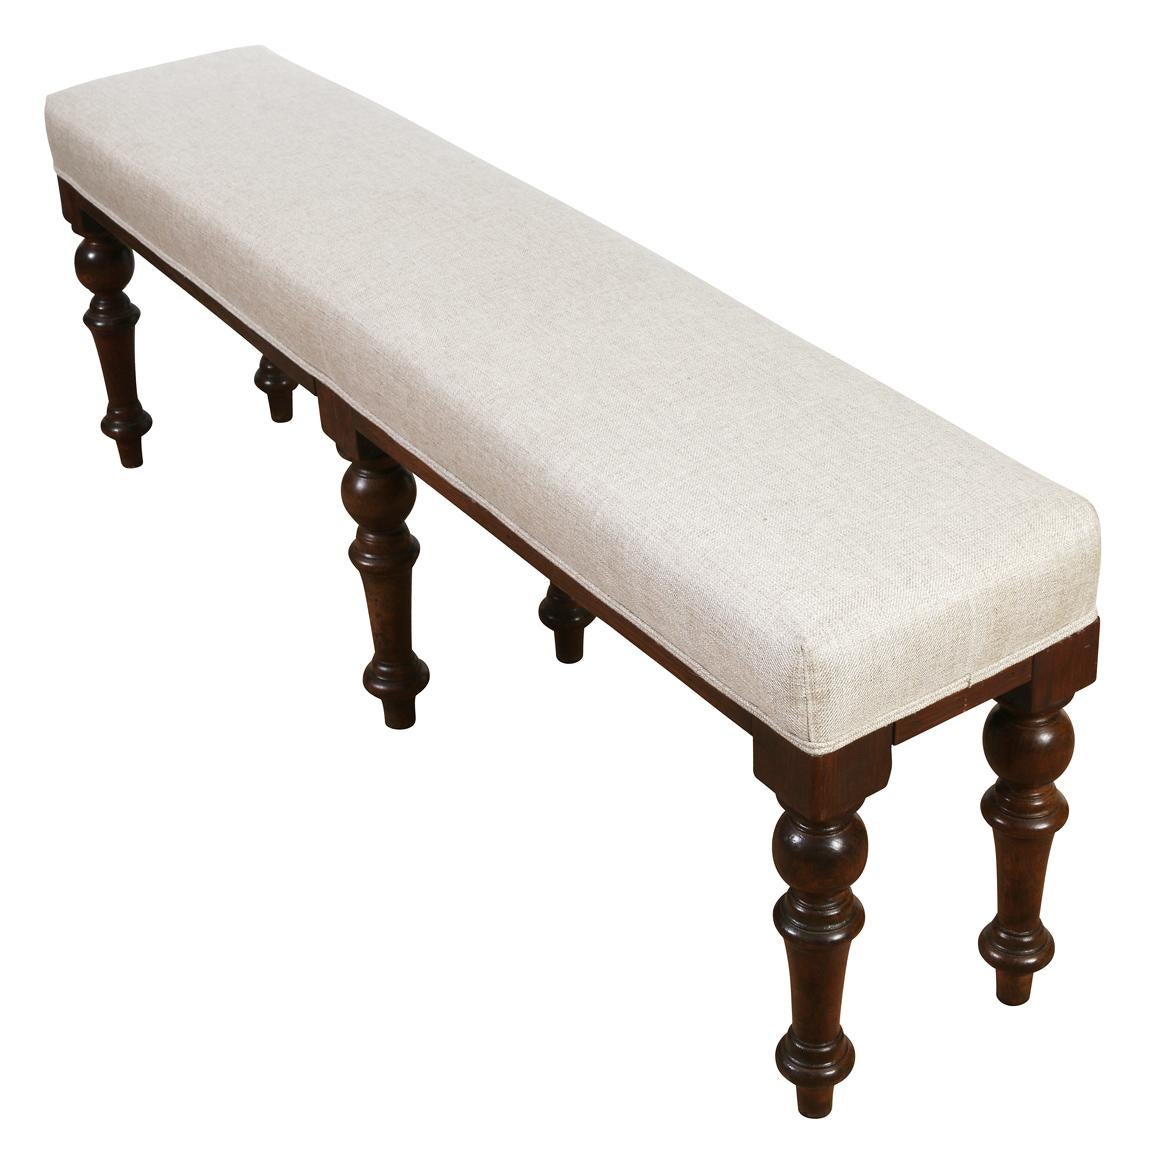 A long English bench with turned mahogany legs, upholstered in a natural linen--perfect for the foot of a bed or in front of the fire.